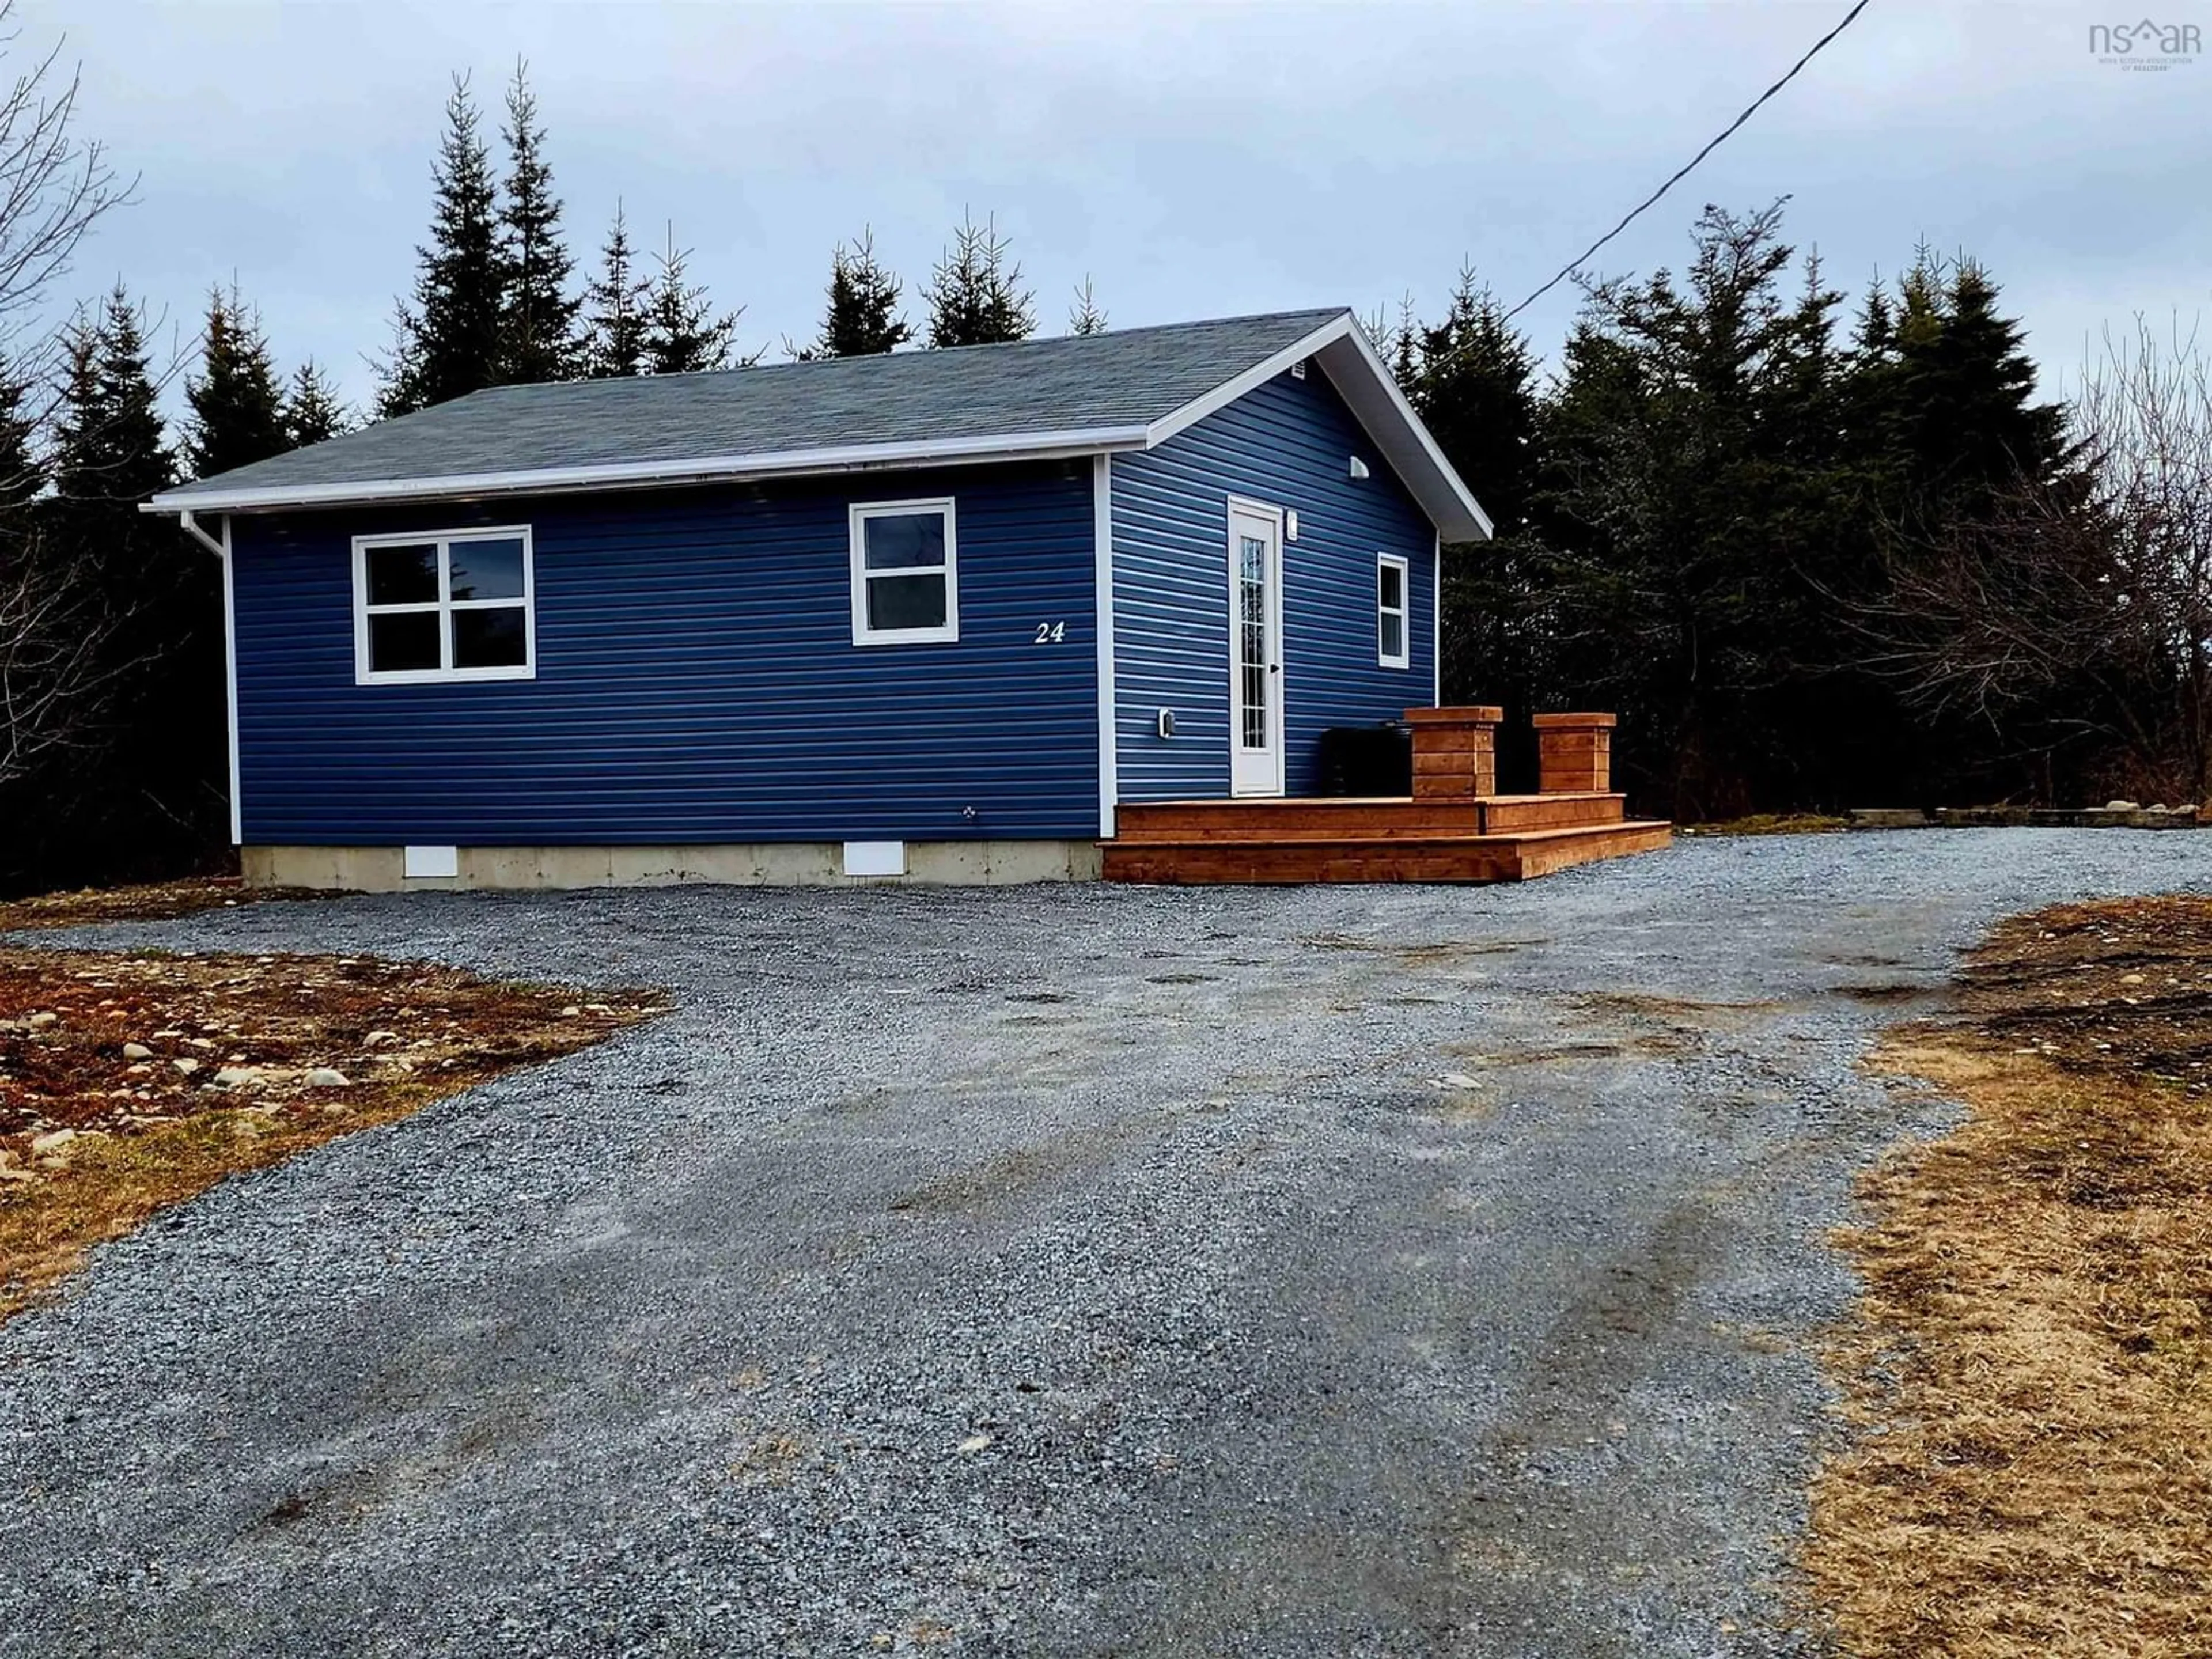 Home with unknown exterior material for 24 Cat Rock Rd, Clam Point Nova Scotia B0W 1N0